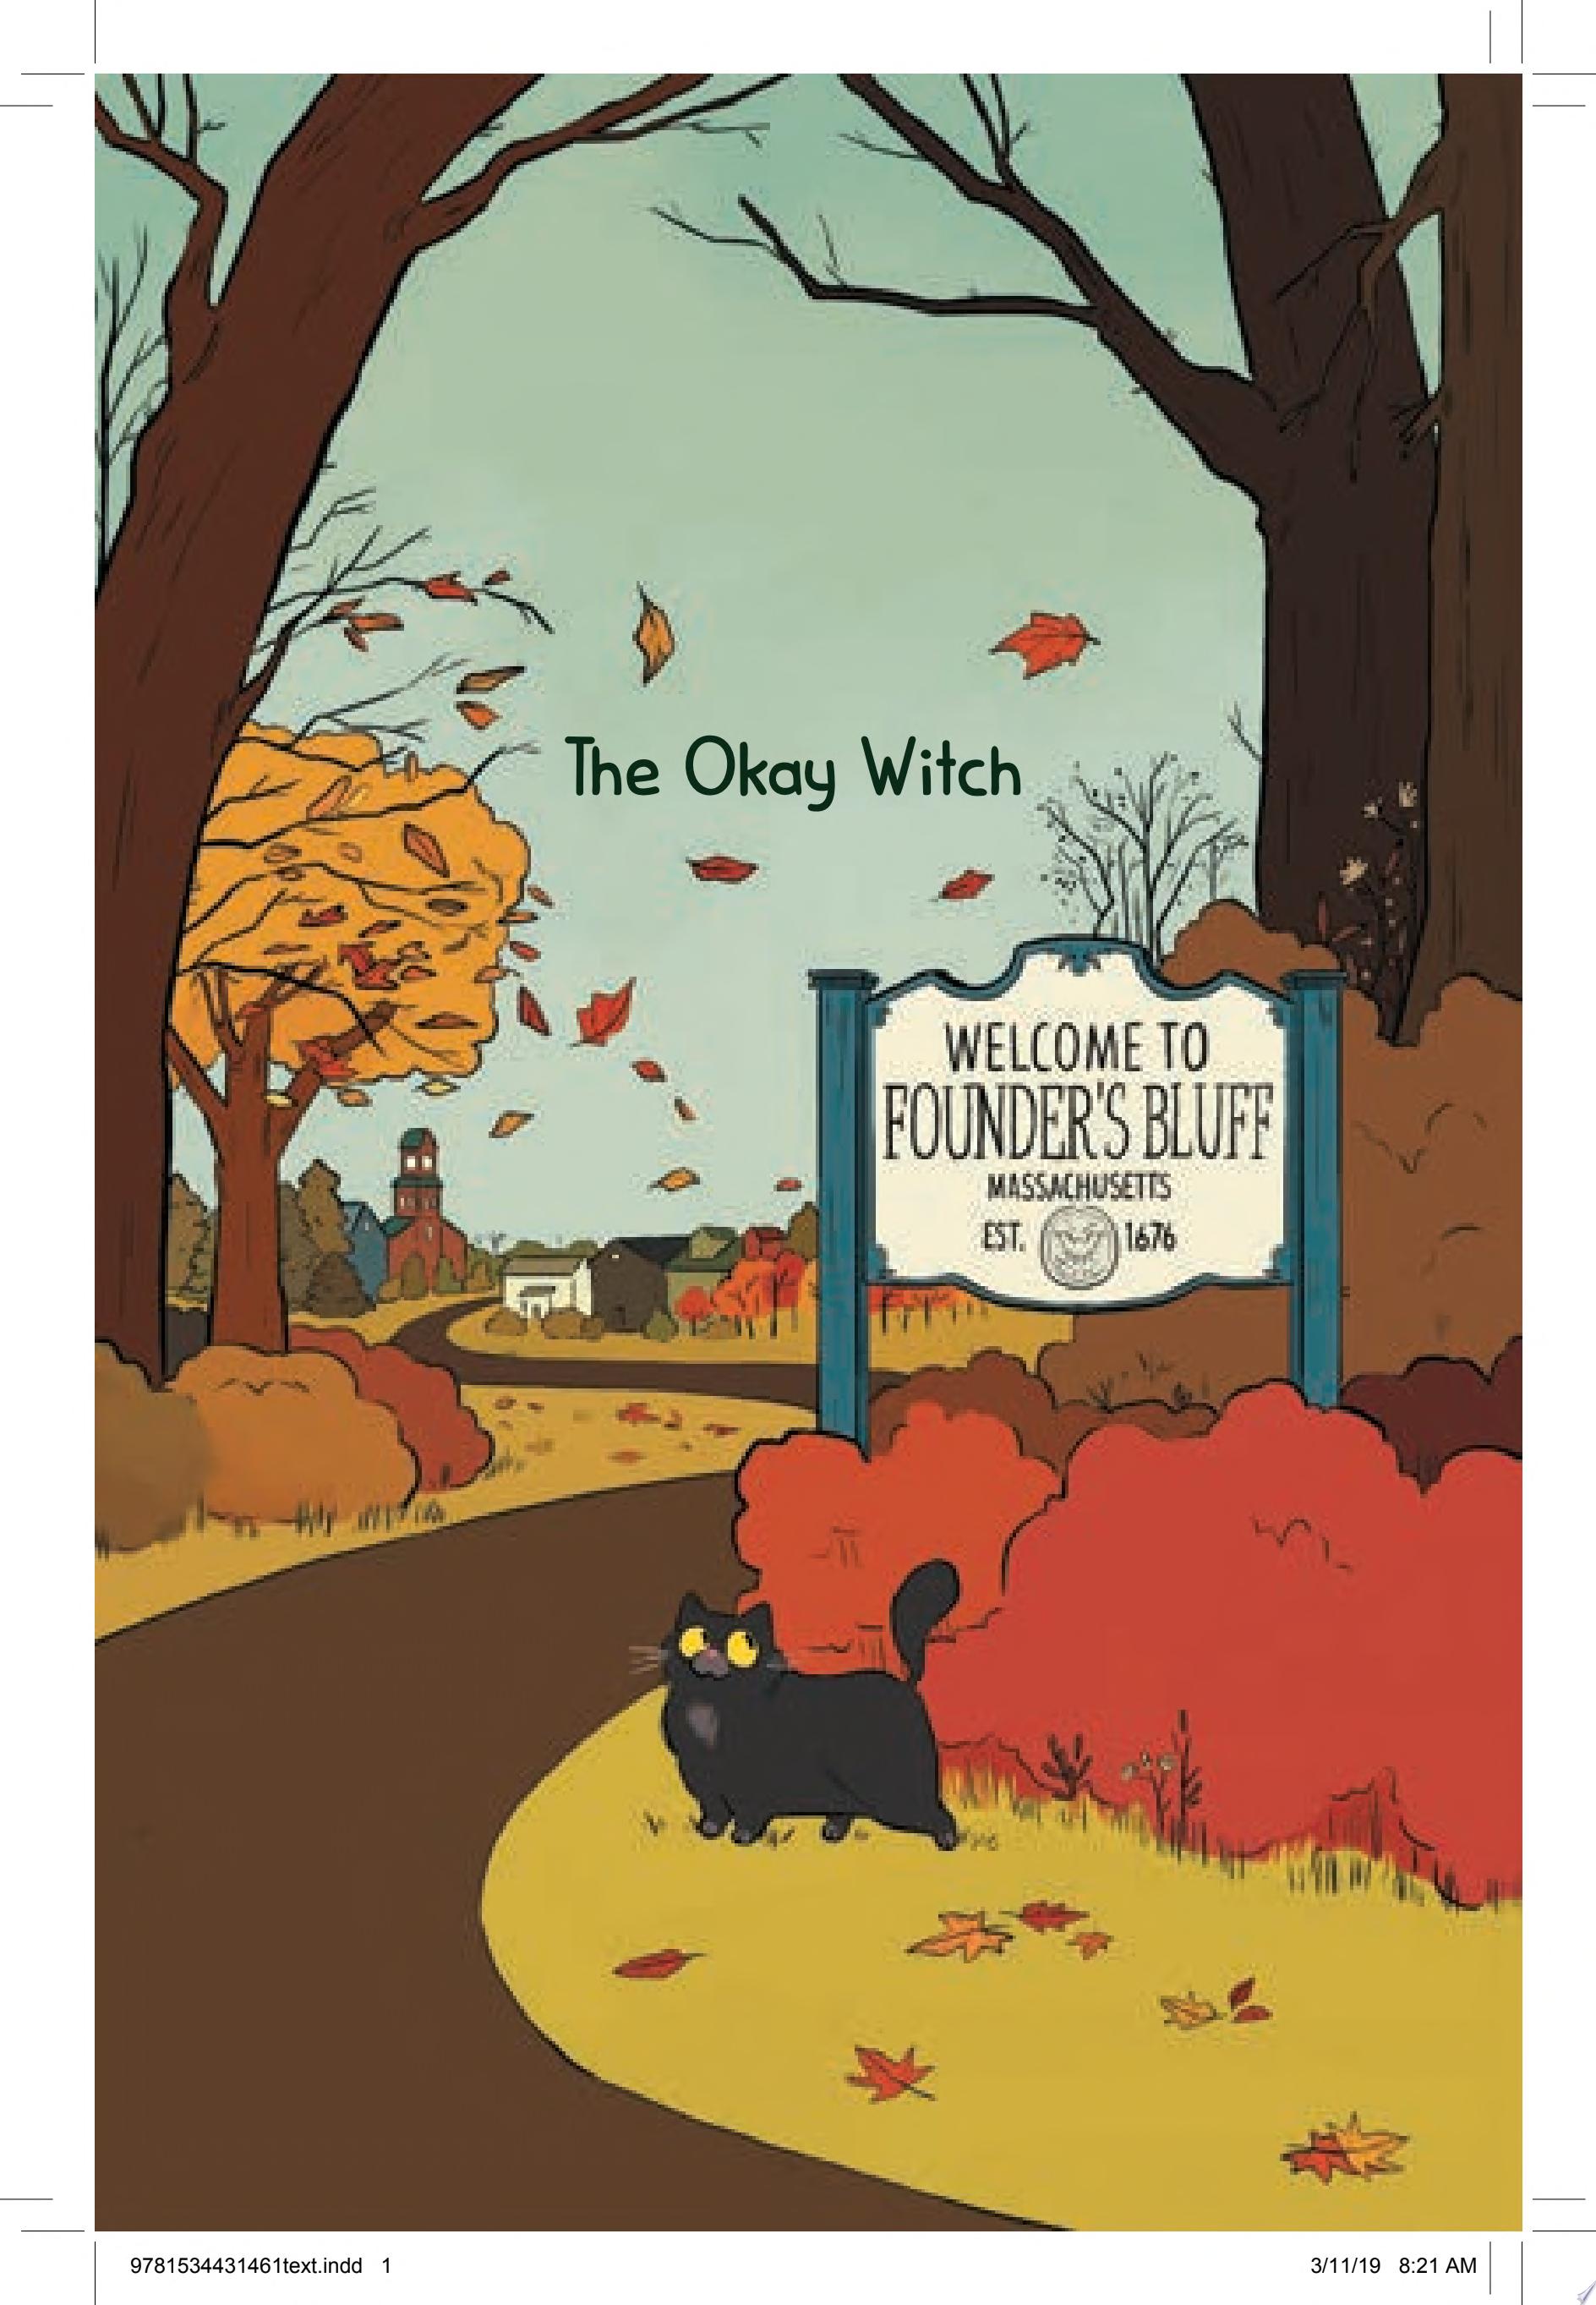 Image for "The Okay Witch"